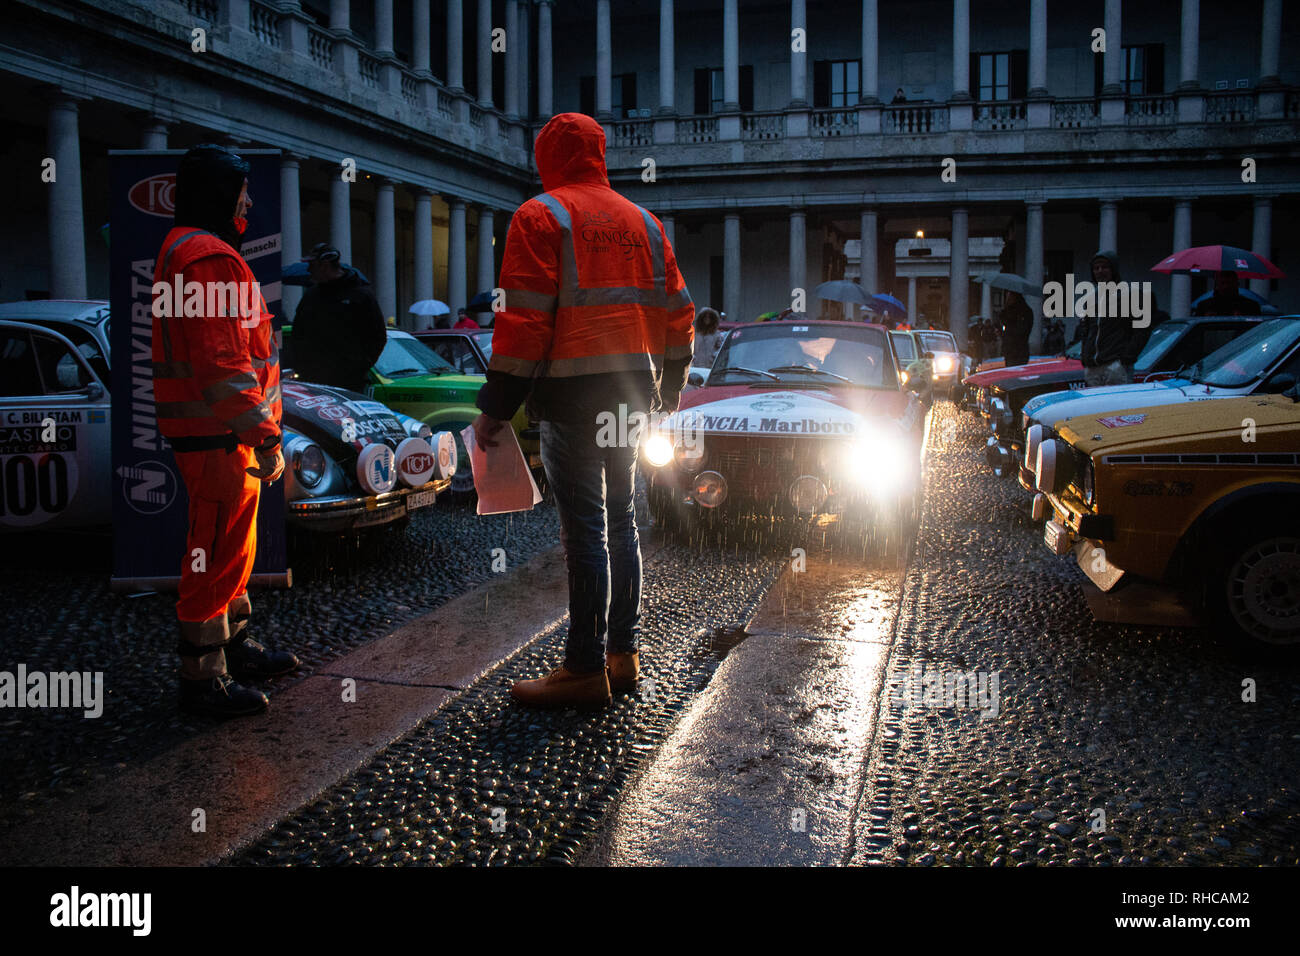 Milan, Italy. 01st Feb, 2019. Classic Cars line up for the Rallye Monte-Carlo Historique 2019 race starting in Milan for the first time since 1932. Credit: Alessandro Bremec/Alamy Live News Stock Photo